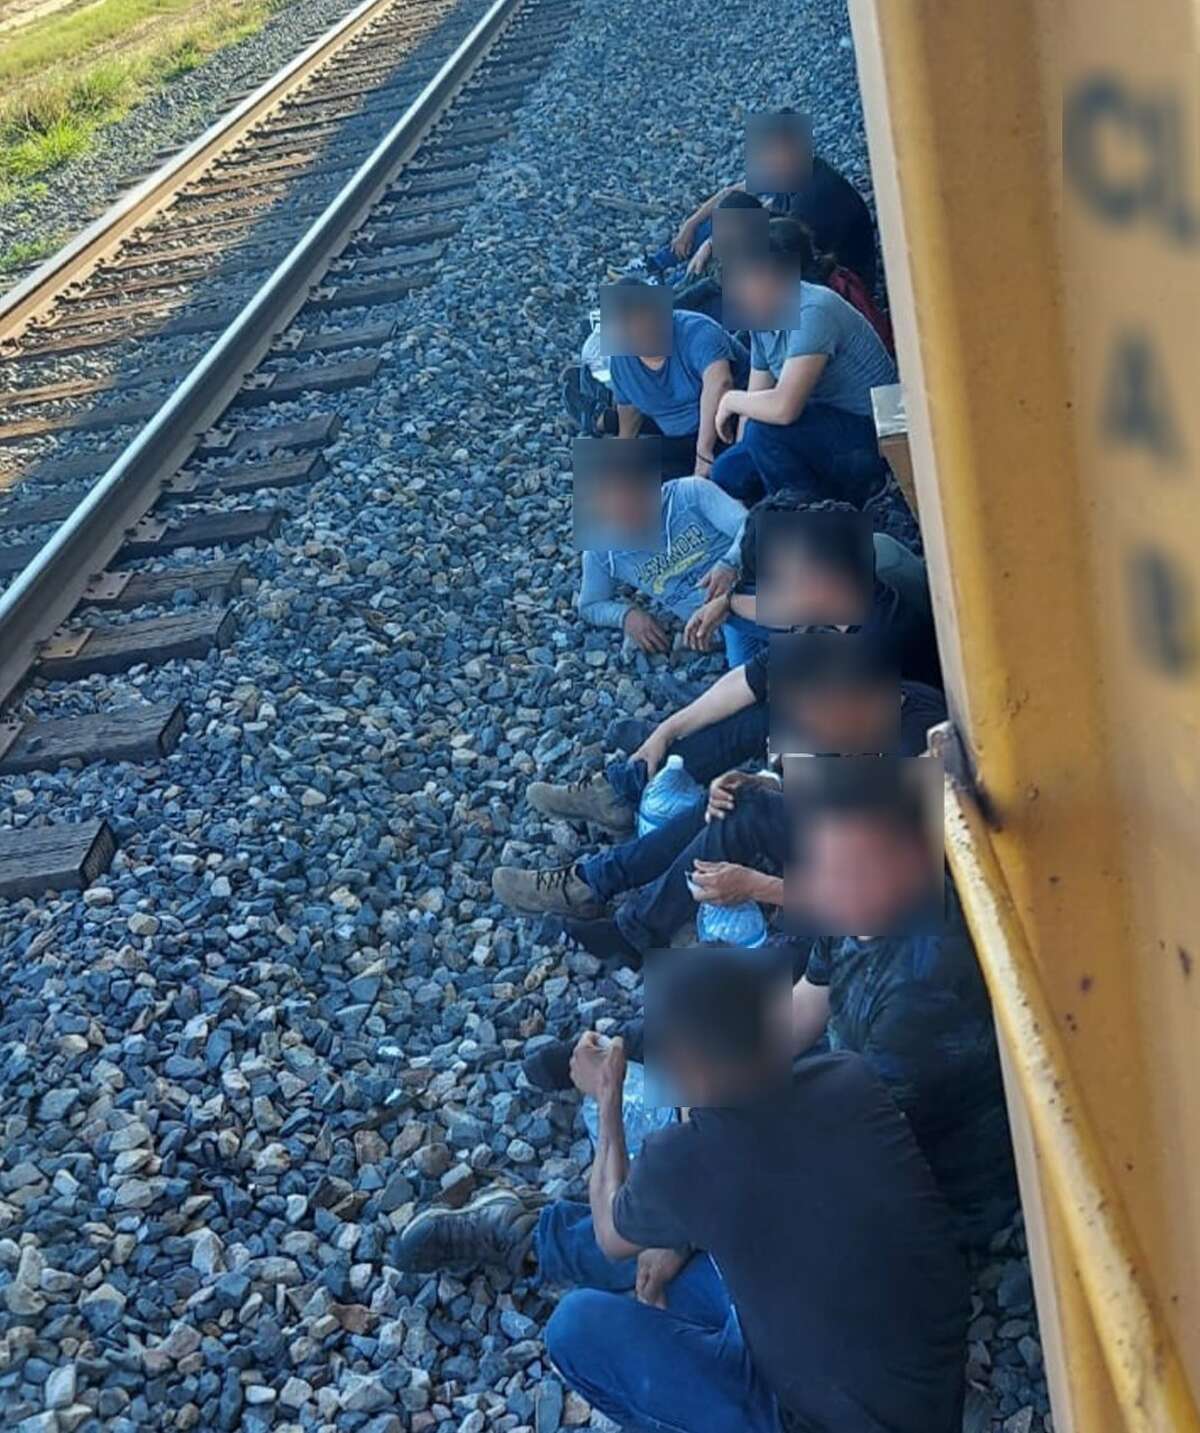 U.S. Border Patrol agents detained several migrants who were using railcars to go further into the United States. At least two migrants were treated for dehydration, according to authorities.